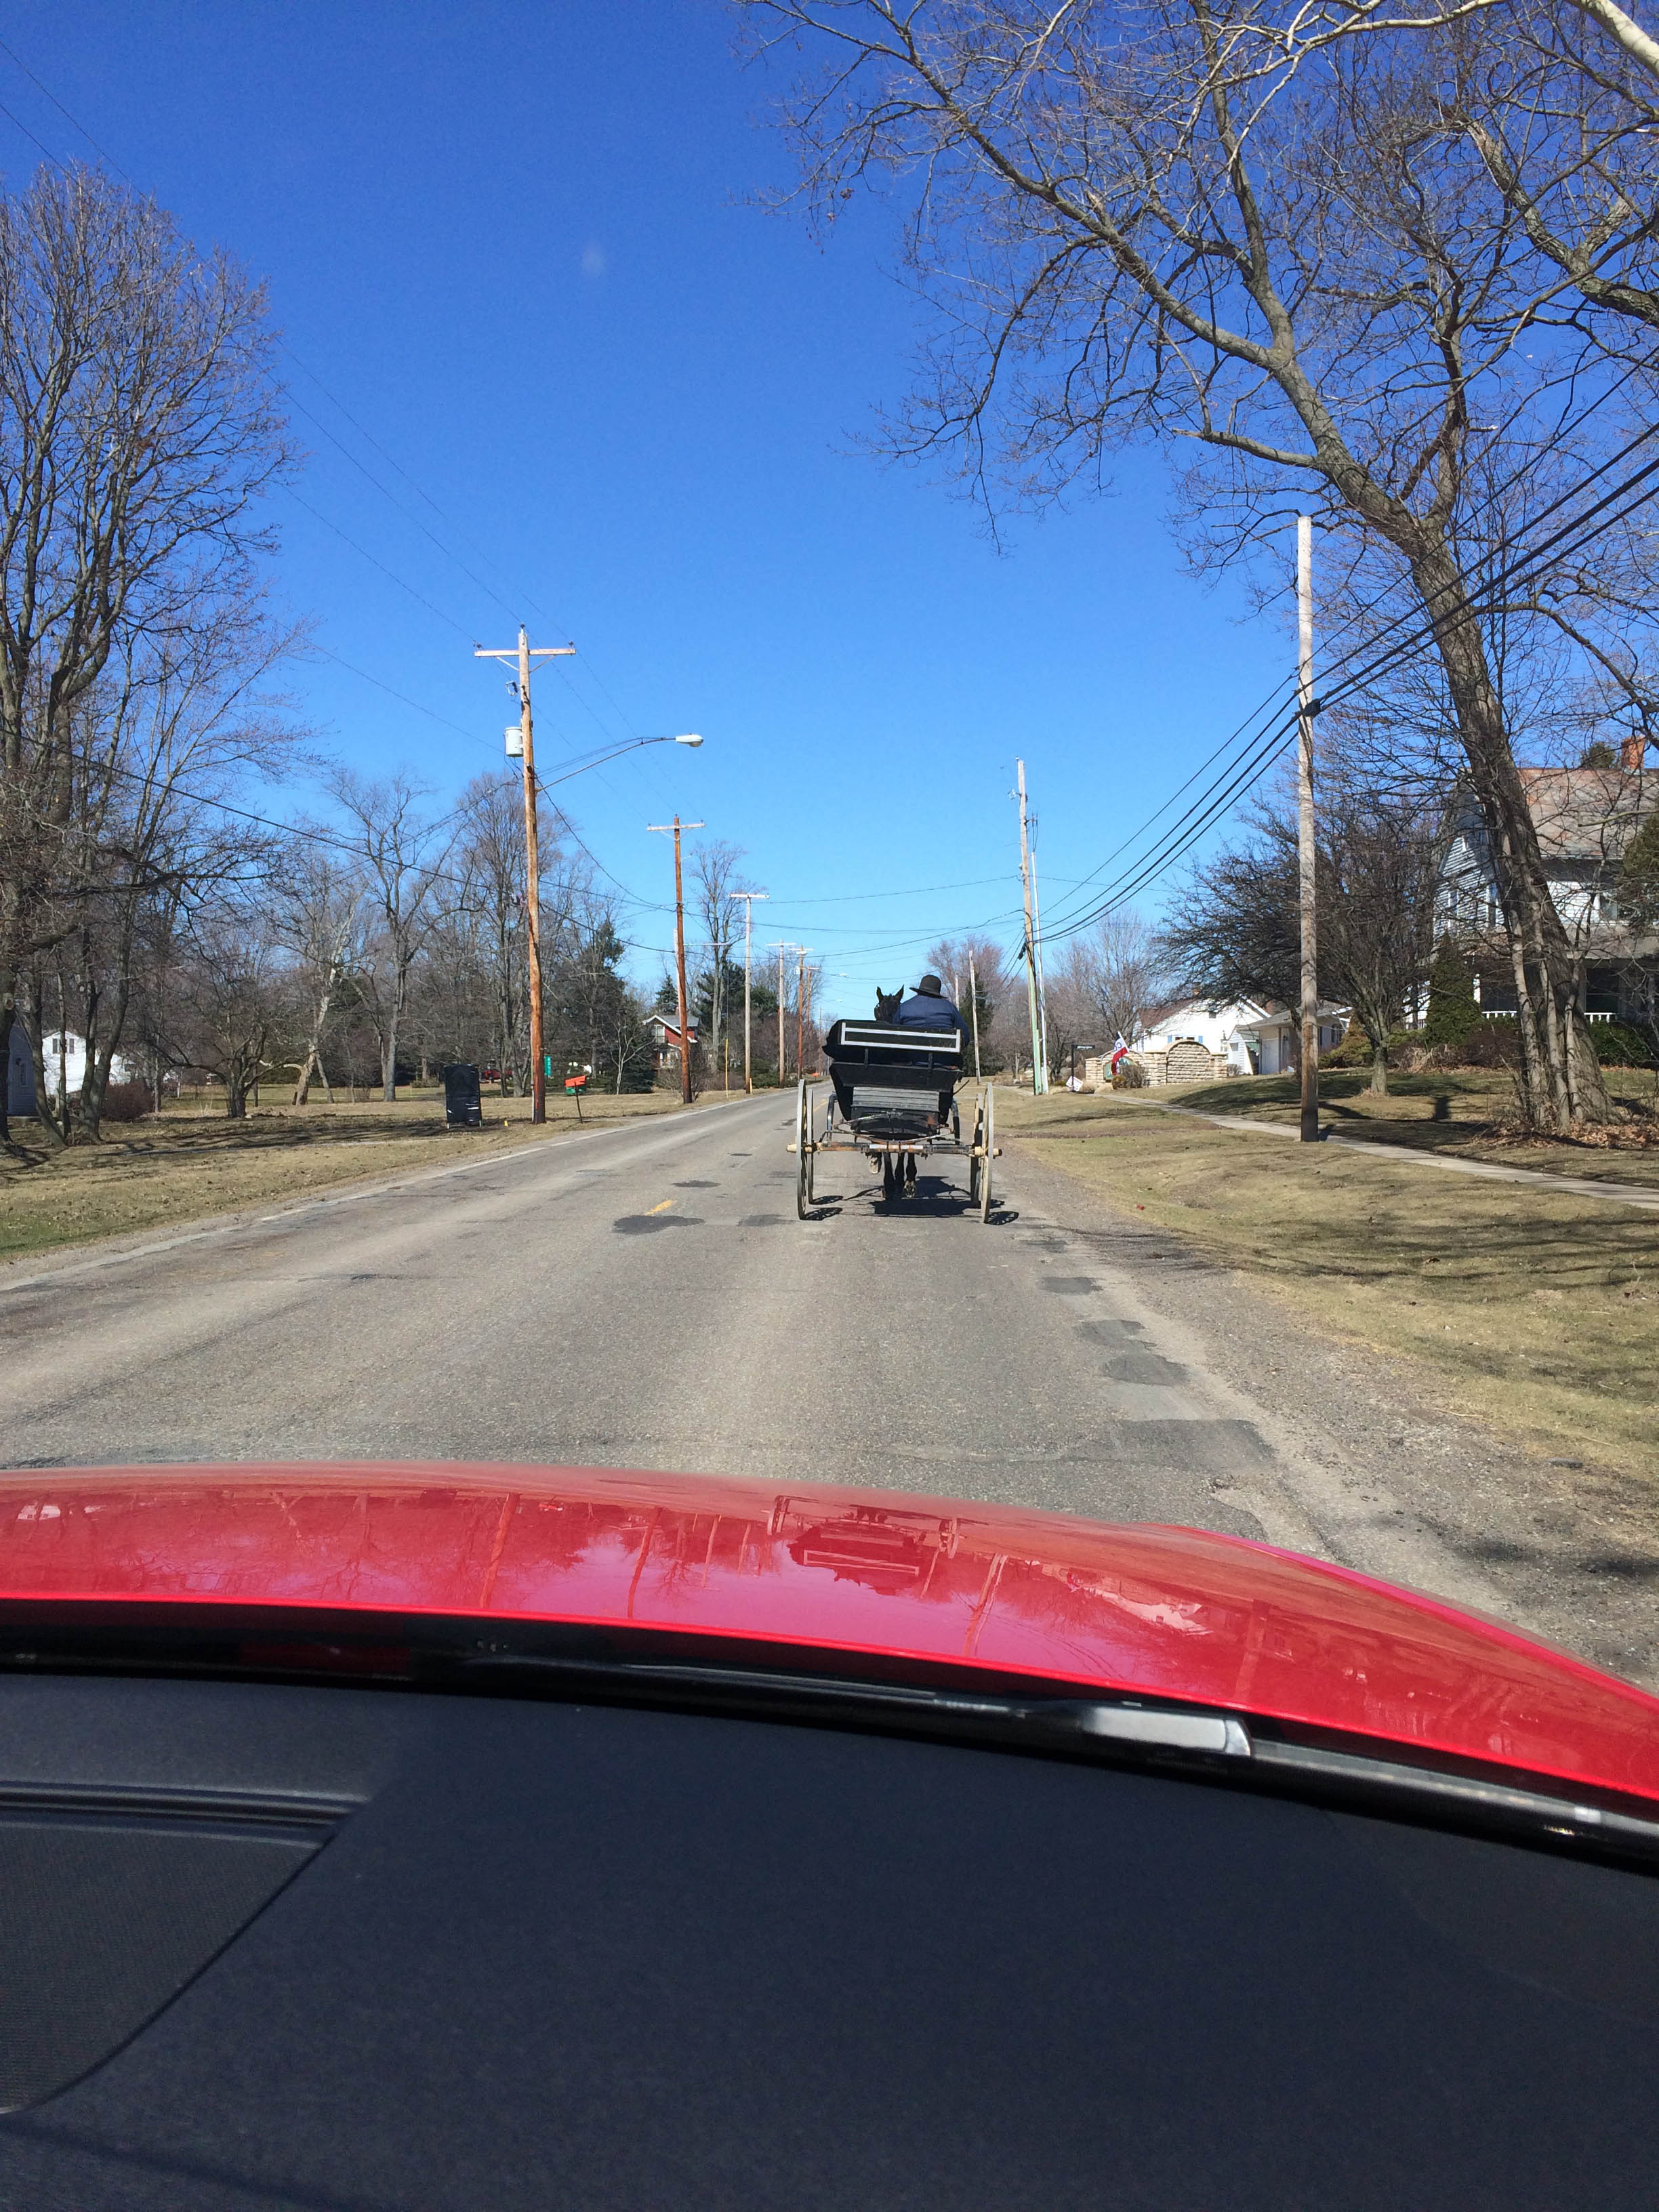 Driving behind slow-moving horse-drawn vehicles is a common occurrence in Kidron. Take it slow and enjoy the scenery!